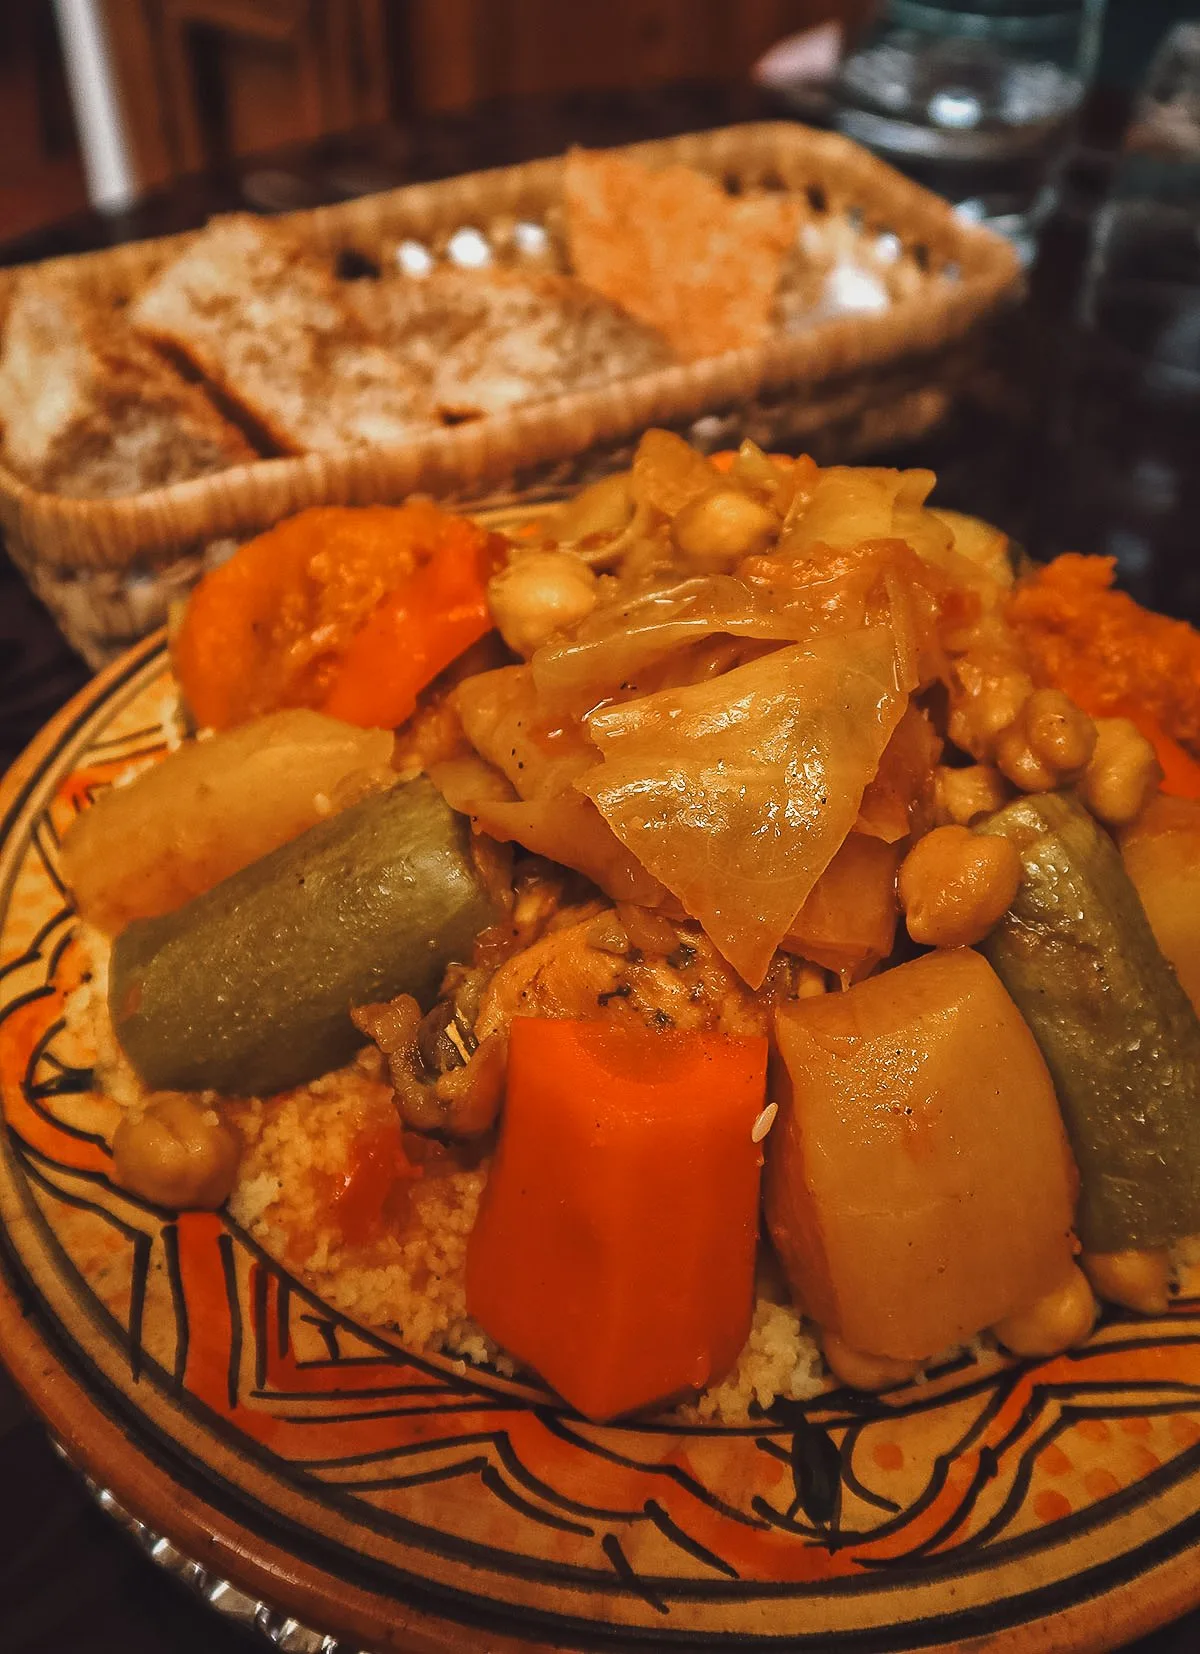 Vegetable couscous at a restaurant in Rabat